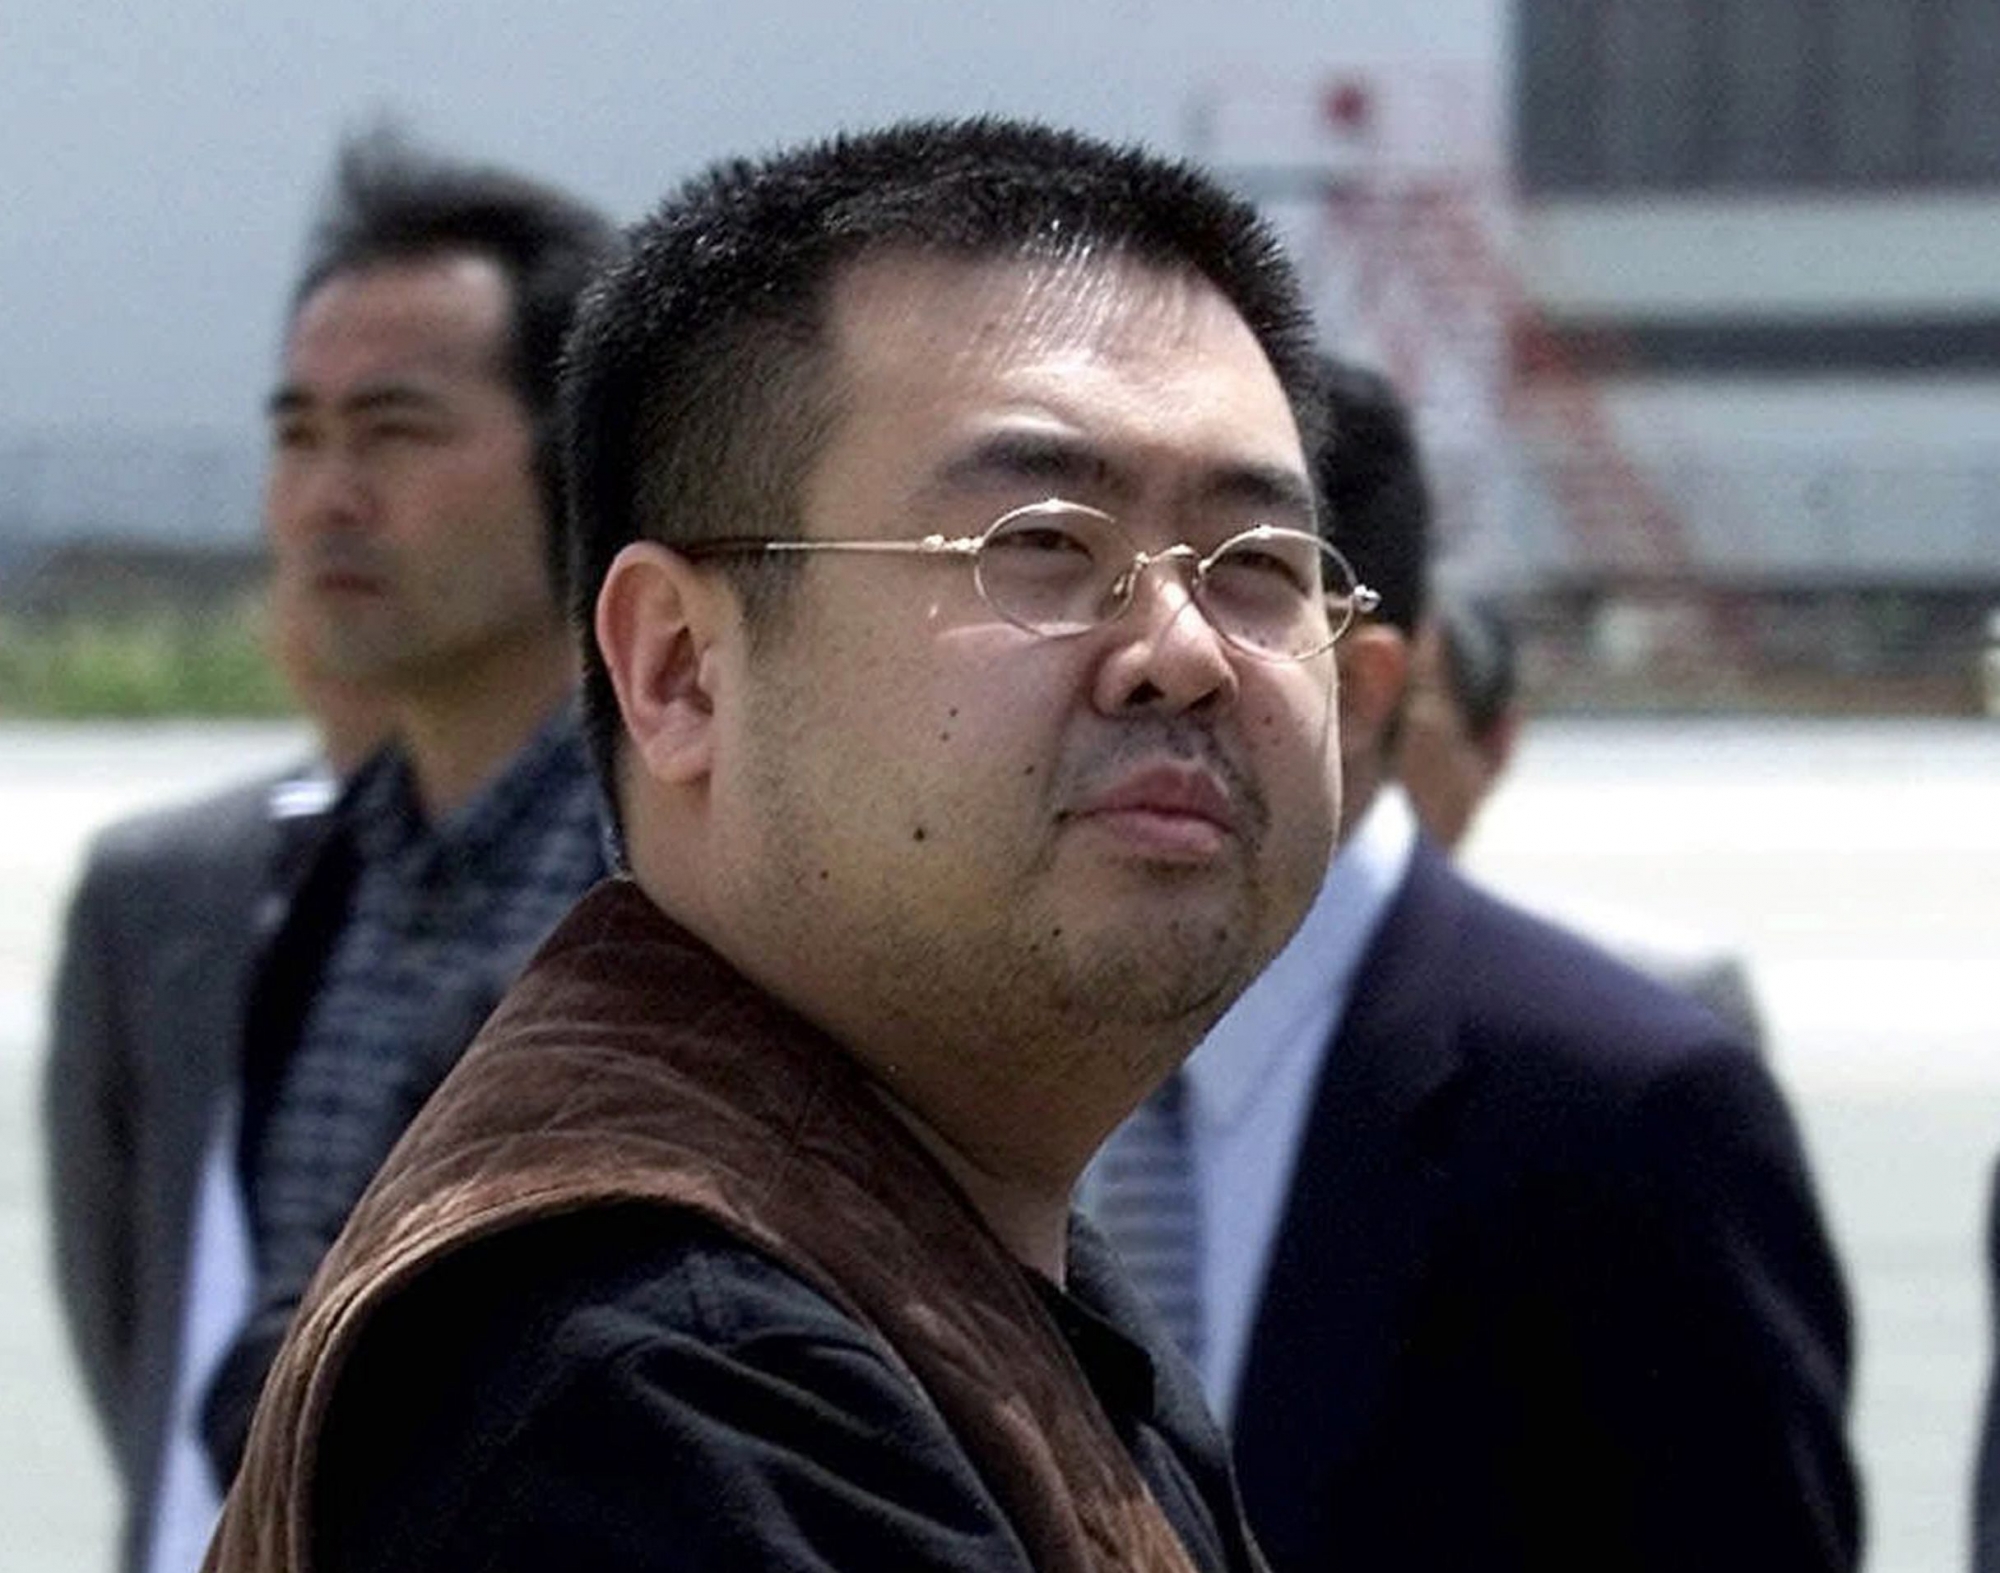 FILE - In this May 4, 2001, file photo, a man believed to be Kim Jong Nam, the eldest son of then North Korean leader Kim Jong Il, looks at a battery of photographers as he exits a police van to board a plane to Beijing at Narita international airport in Narita, northeast of Tokyo. Police in Malaysia say the half brother of North Korea's leader who was killed in a Kuala Lumpur airport more than a week ago had a nerve agent on his eye and his face. A statement Friday, Feb. 24, 2017 from the inspector general of police said that a preliminary analysis from the Chemistry Department of Malaysia identified the agent at "VX NERVE AGENT." (AP Photo/Shizuo Kambayashi, File) Malaysia North Korea